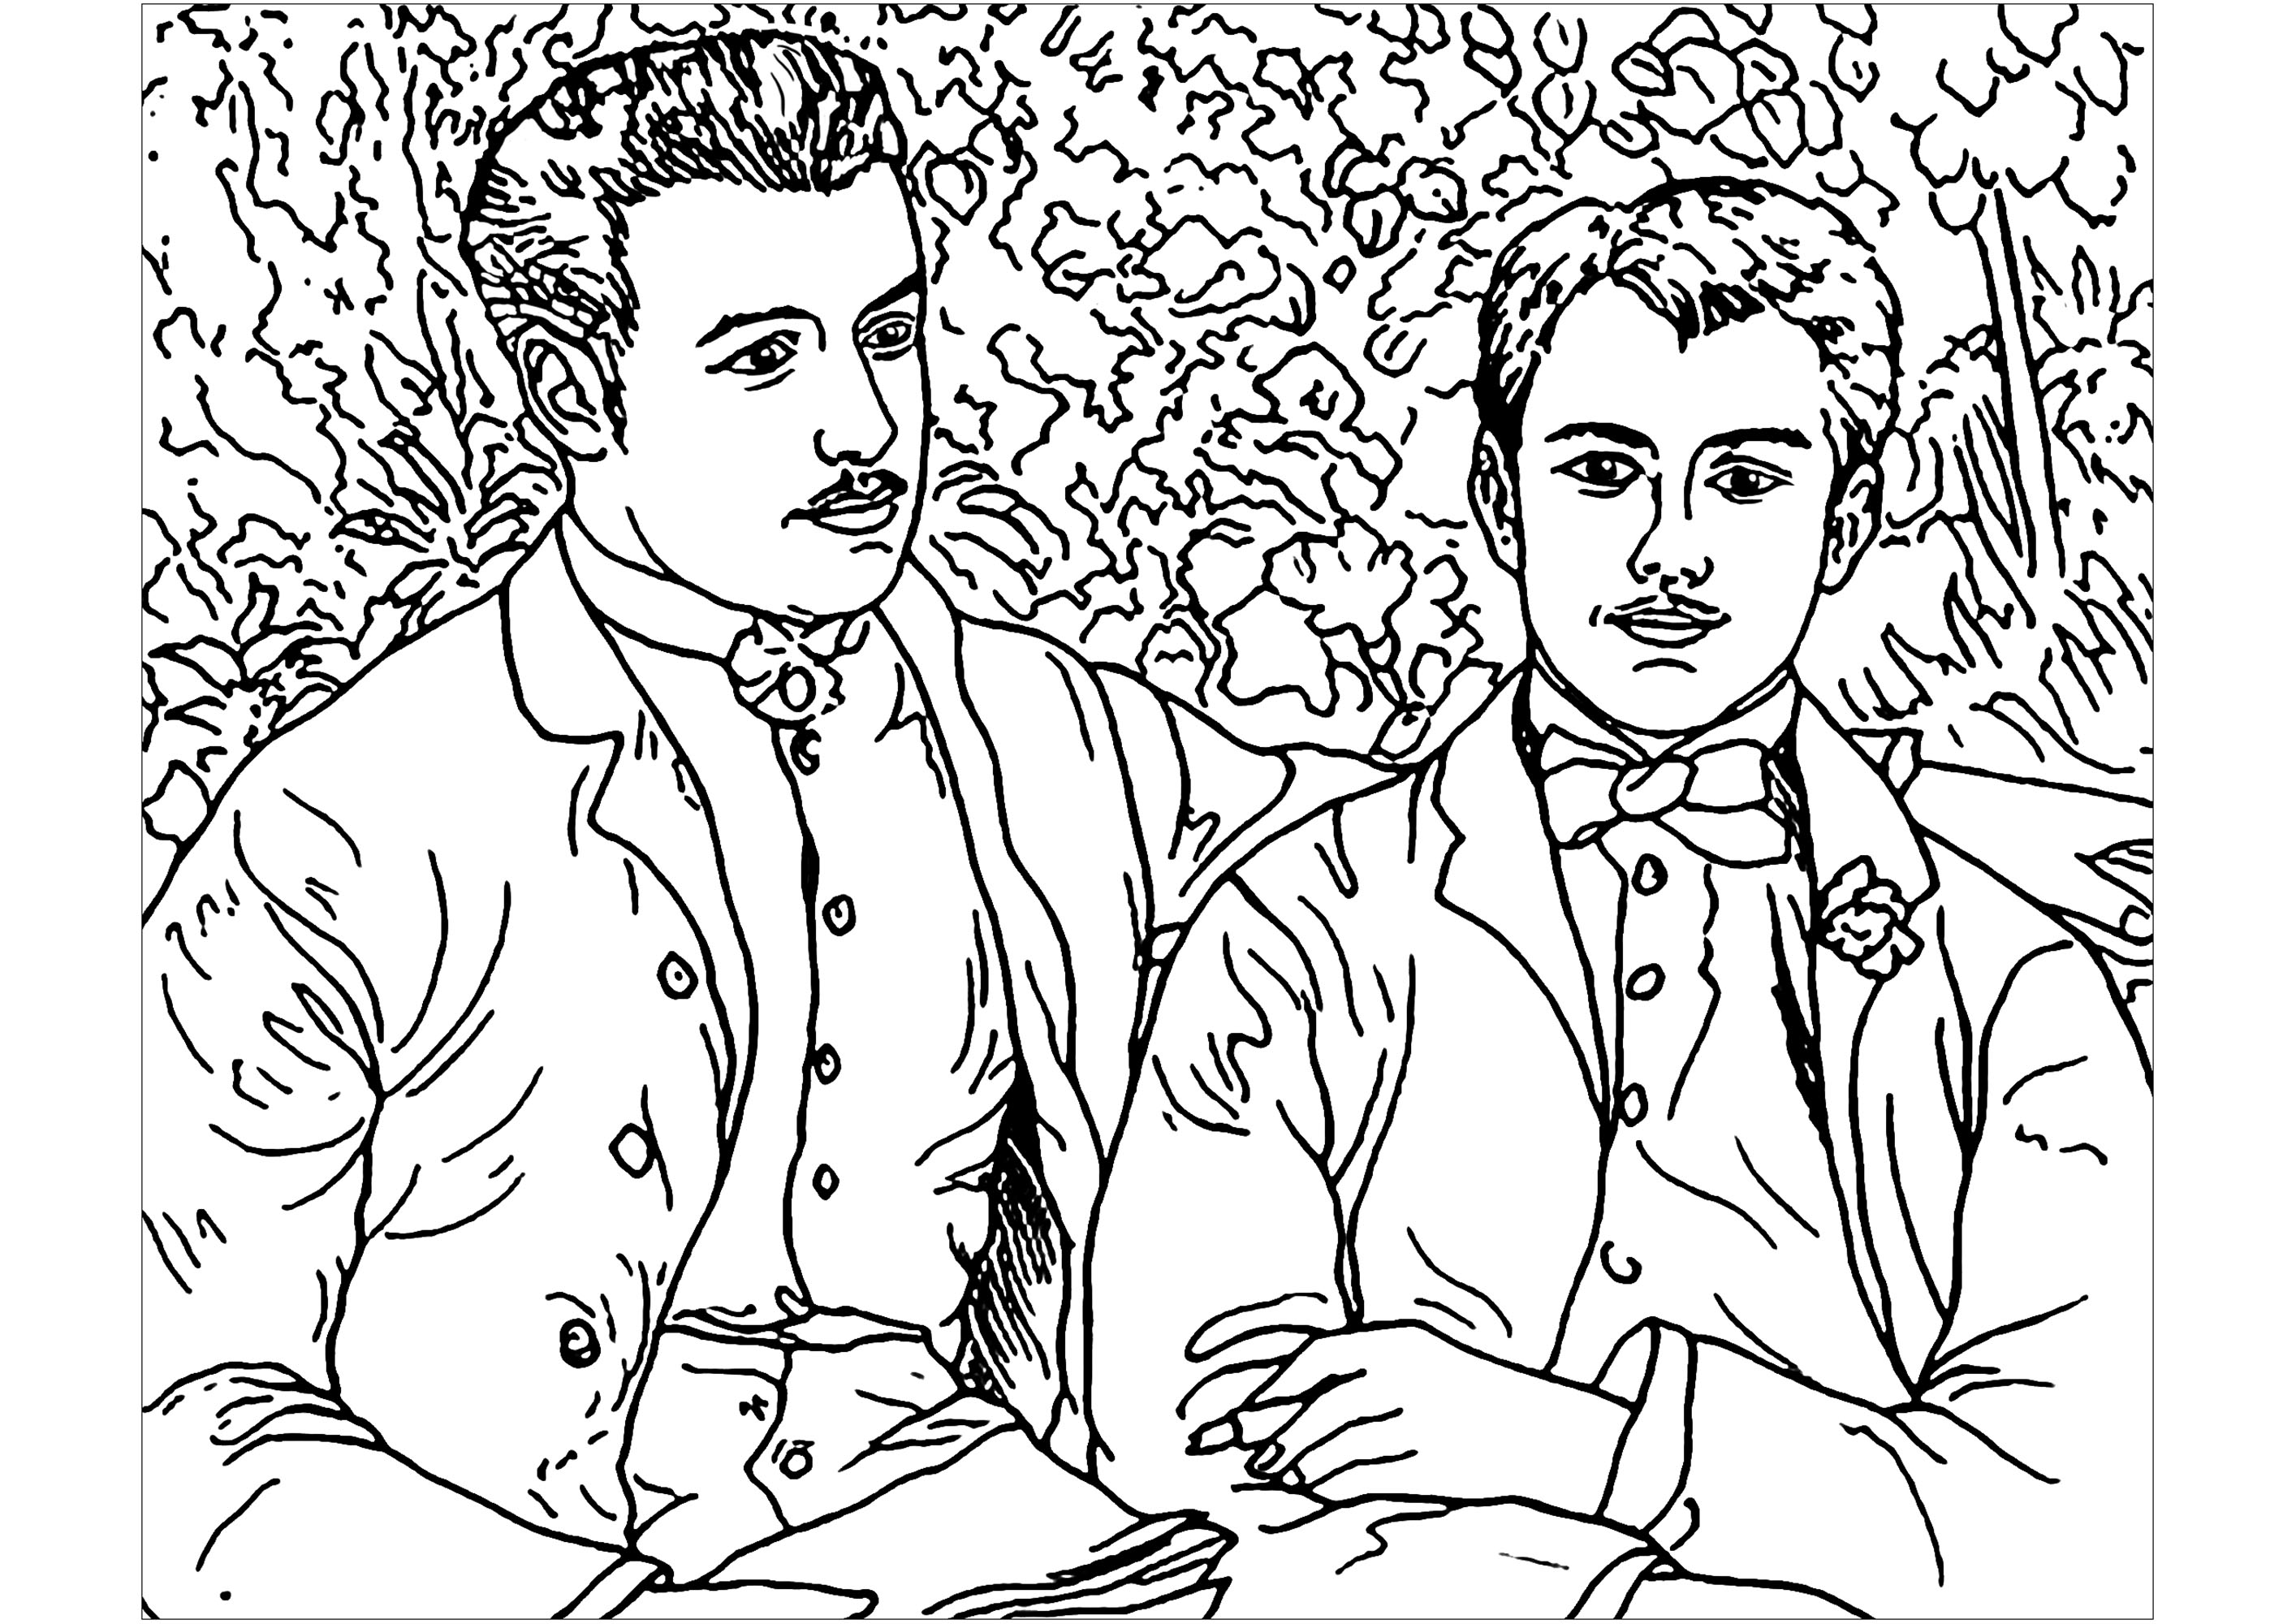 Coloring page inspired by a painting by Impressionist artist Pierre-Auguste Renoir : Portrait of Charles and Georges Durand Ruel, Artist : Art. Isabelle